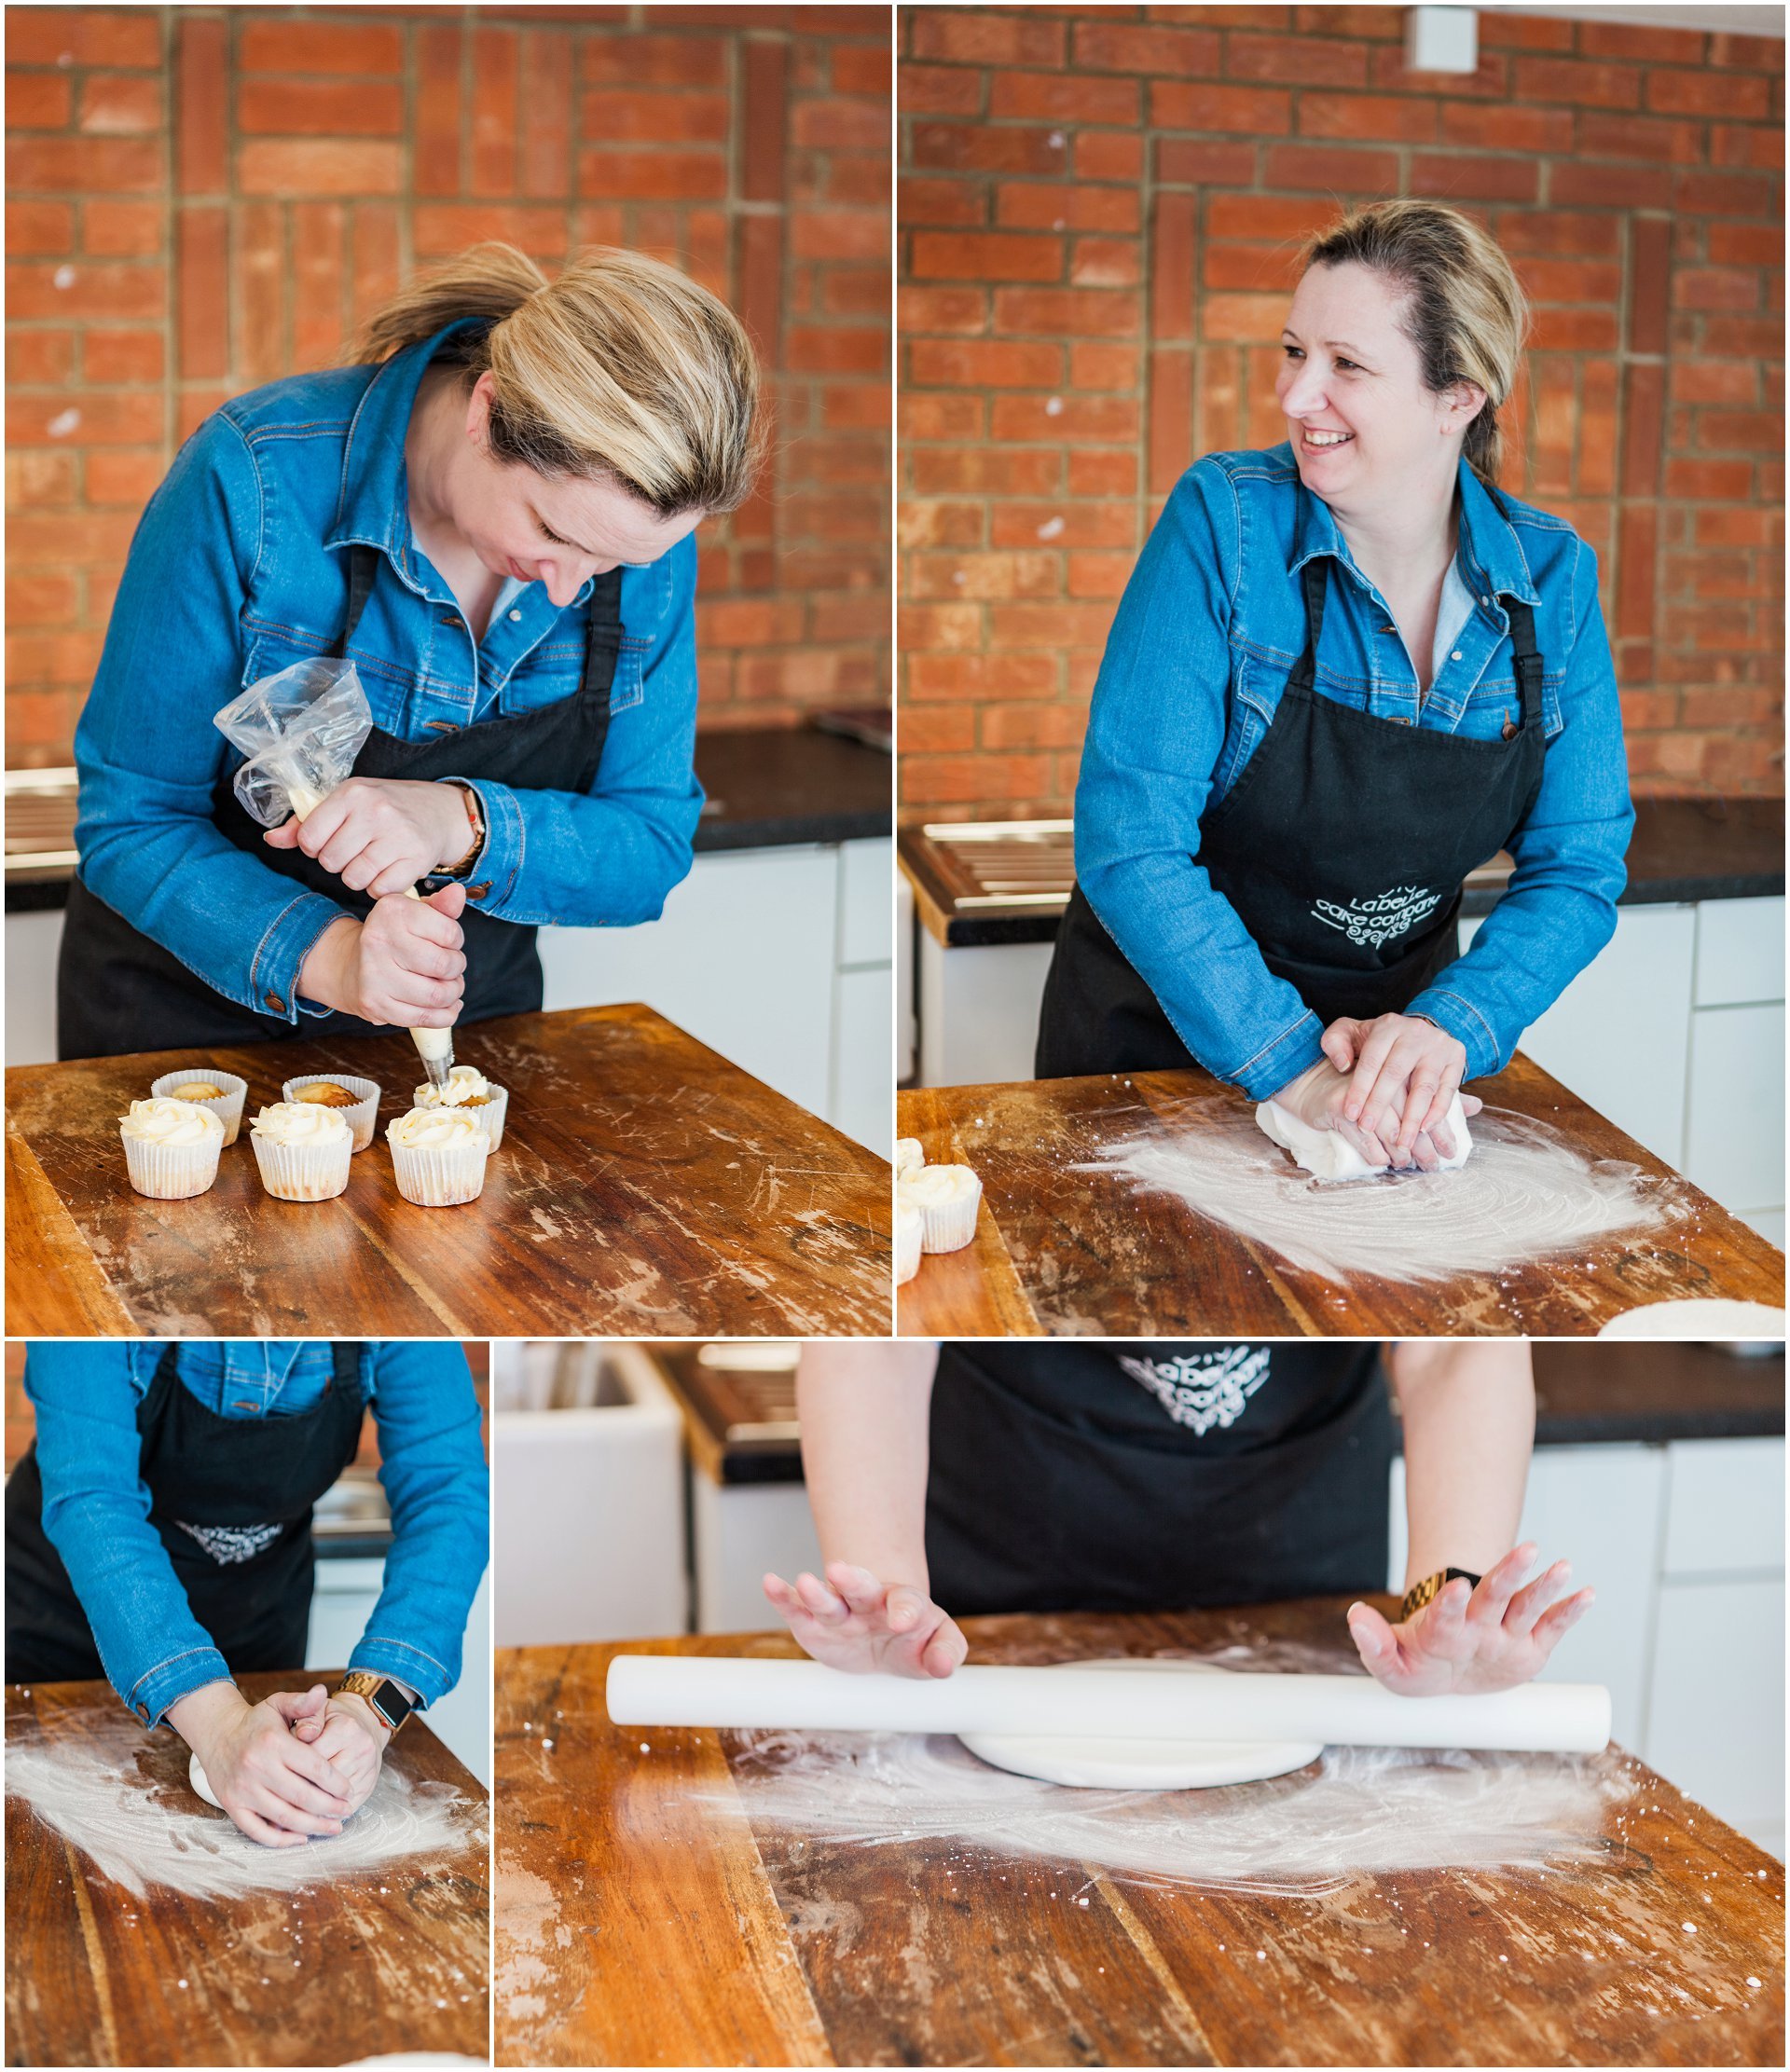 La Belle Cake owner Shelly Shulman icing a cake. Images by London brand photographer AKP Branding Stories